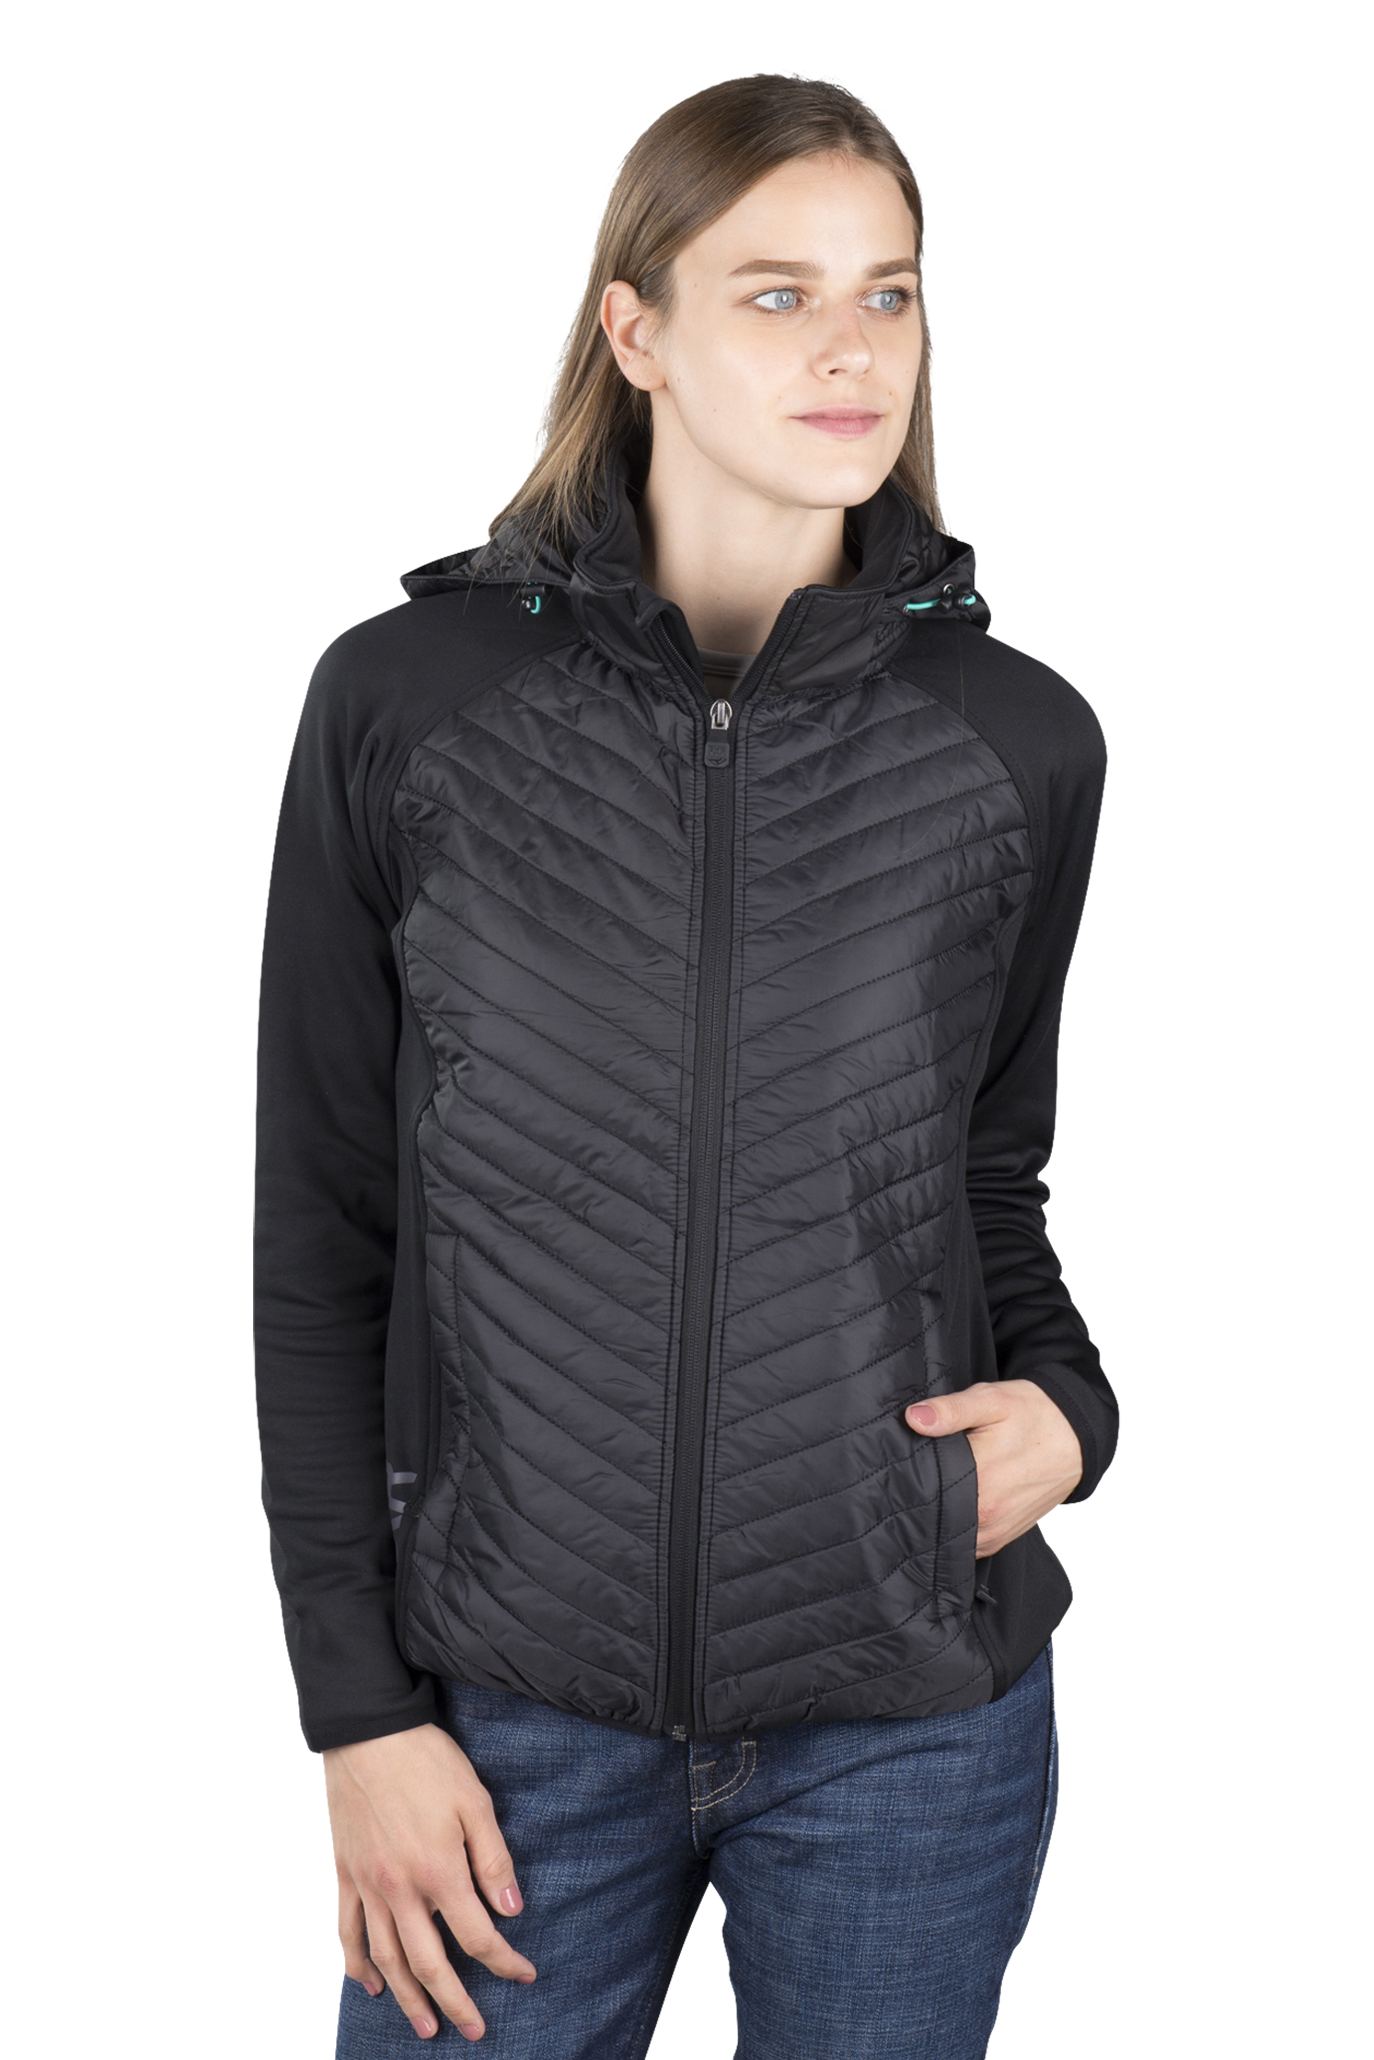 FXR Giacca Donna  Phoenix Quilted Nera